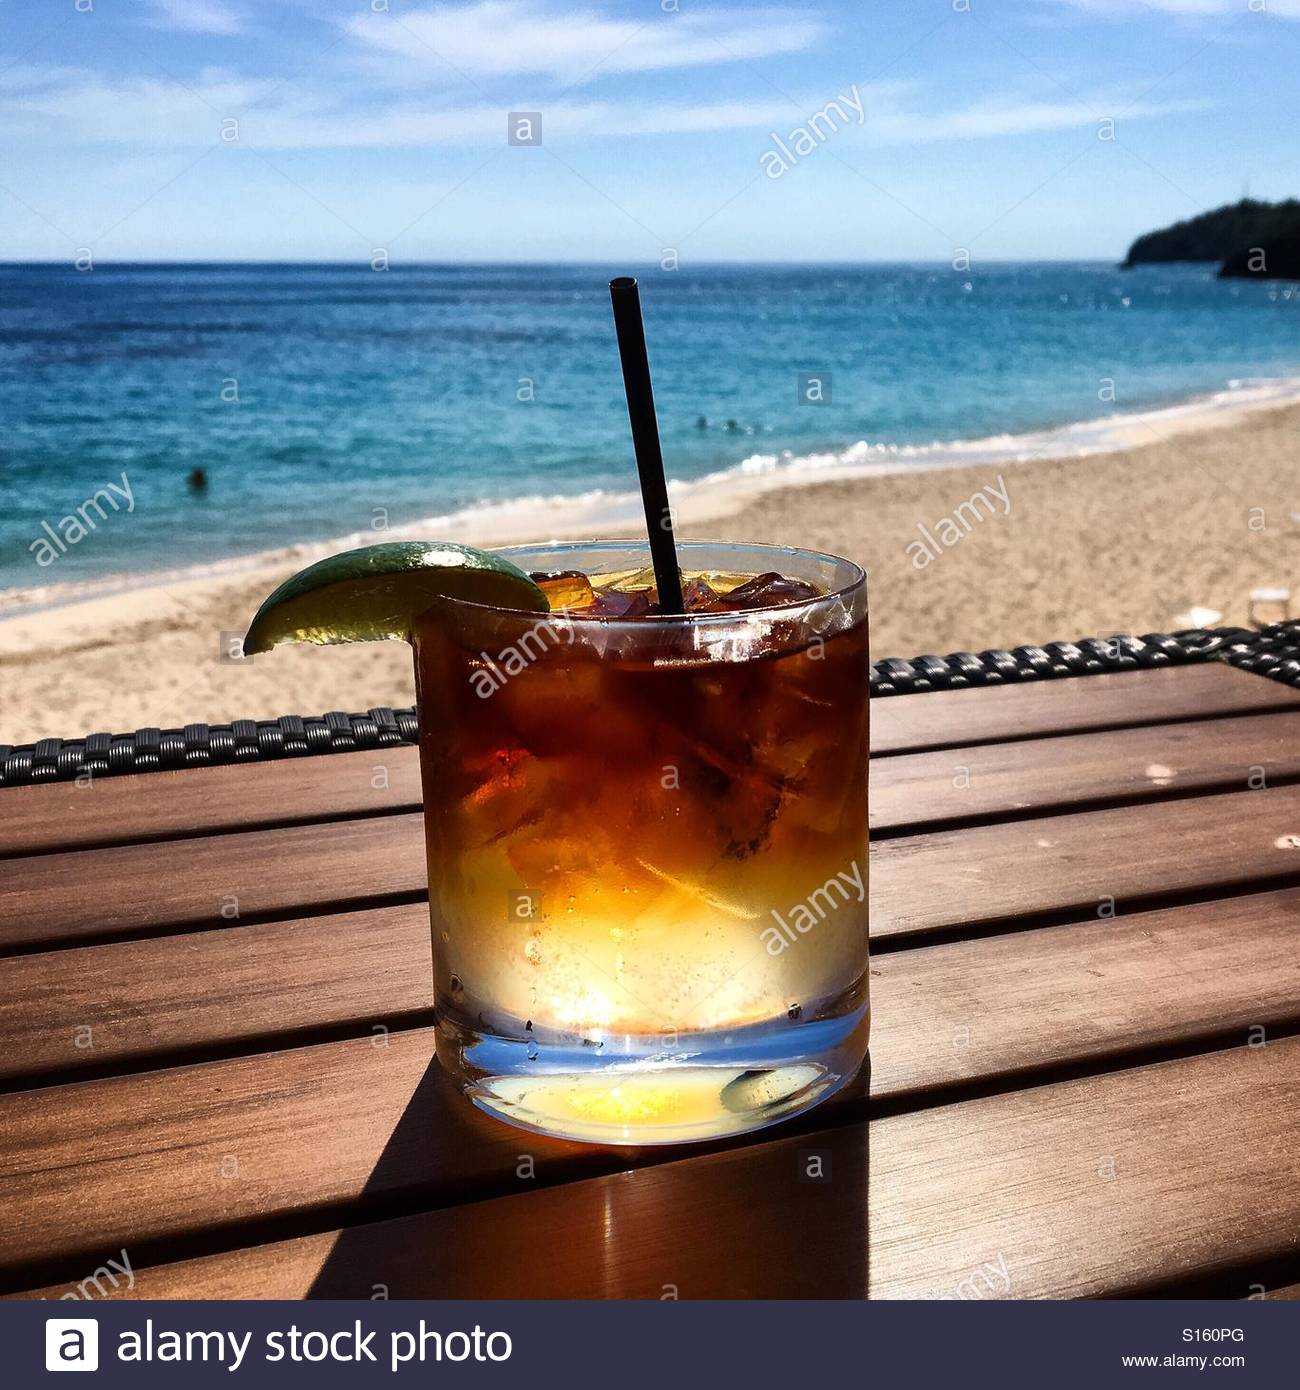 Dark And Stormy Cocktail With Bermuda Beach Ocean In